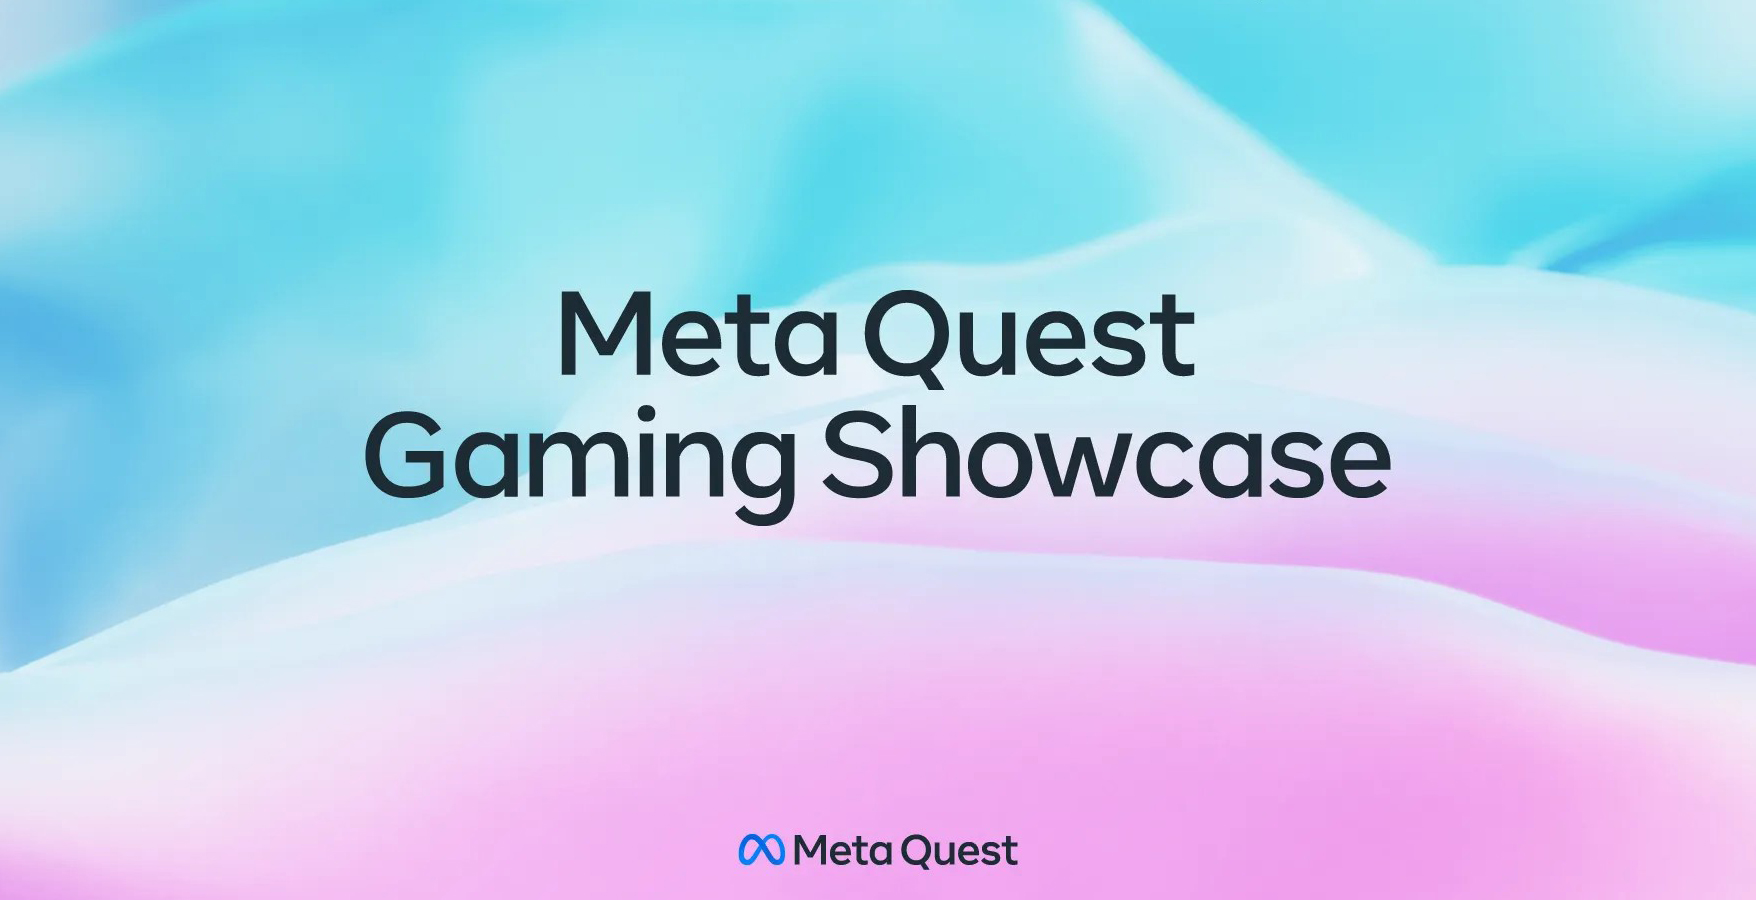 New Games, Updates and More From the Meta Quest Gaming Showcase | Meta